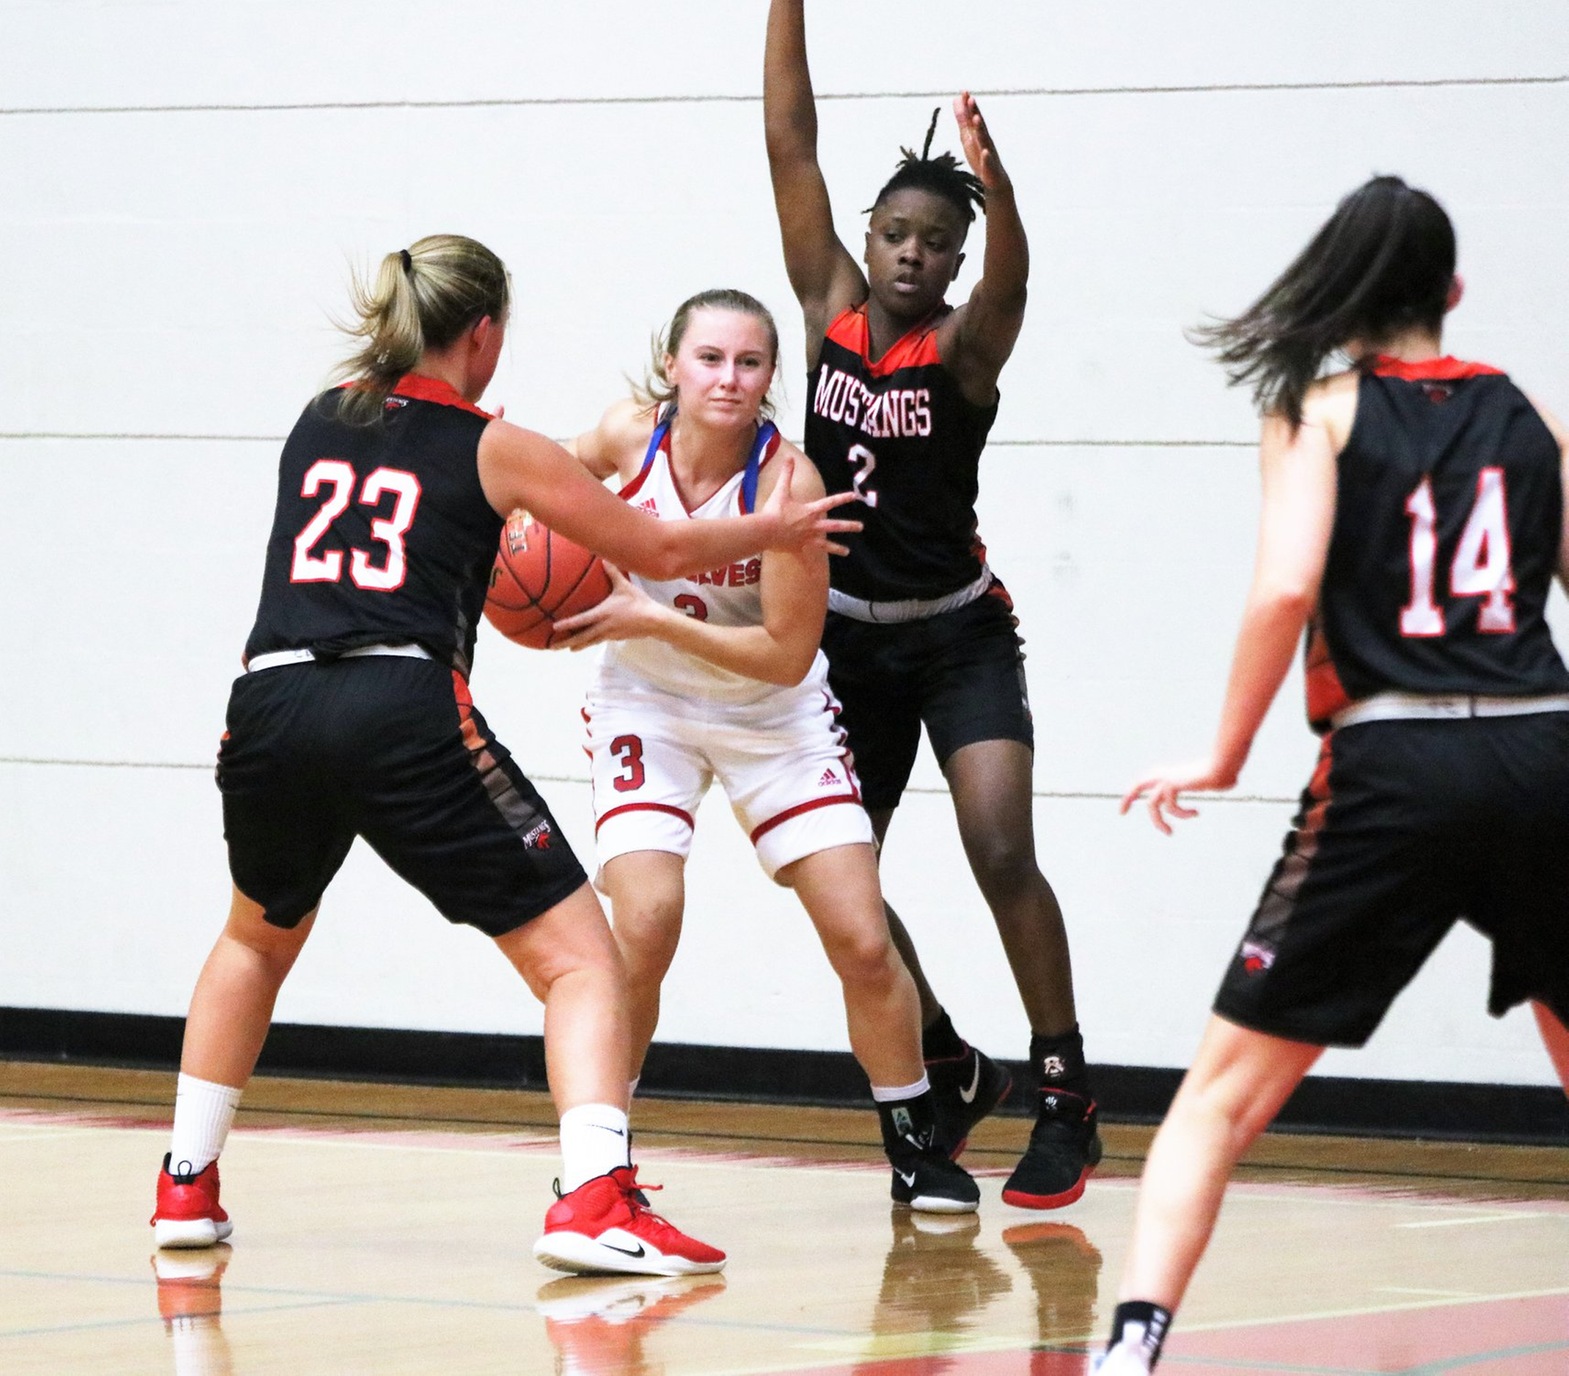 Women's Basketball grinds out win over Lions